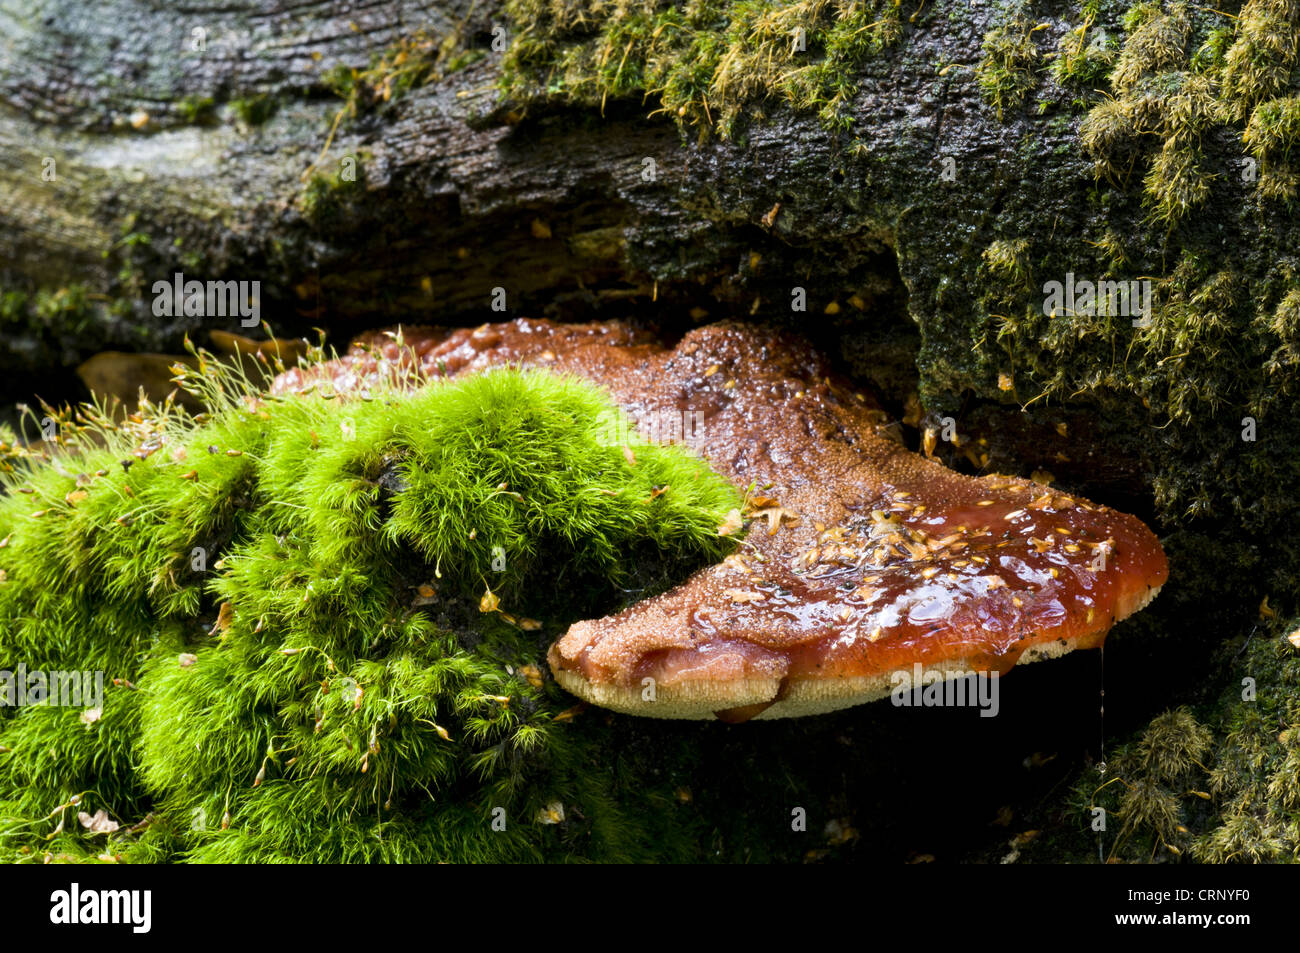 Beefsteak Fungus (Fistulina hepatica) fruiting body, oozing sticky red liquid, growing from moss covered log, Clumber Park, Stock Photo